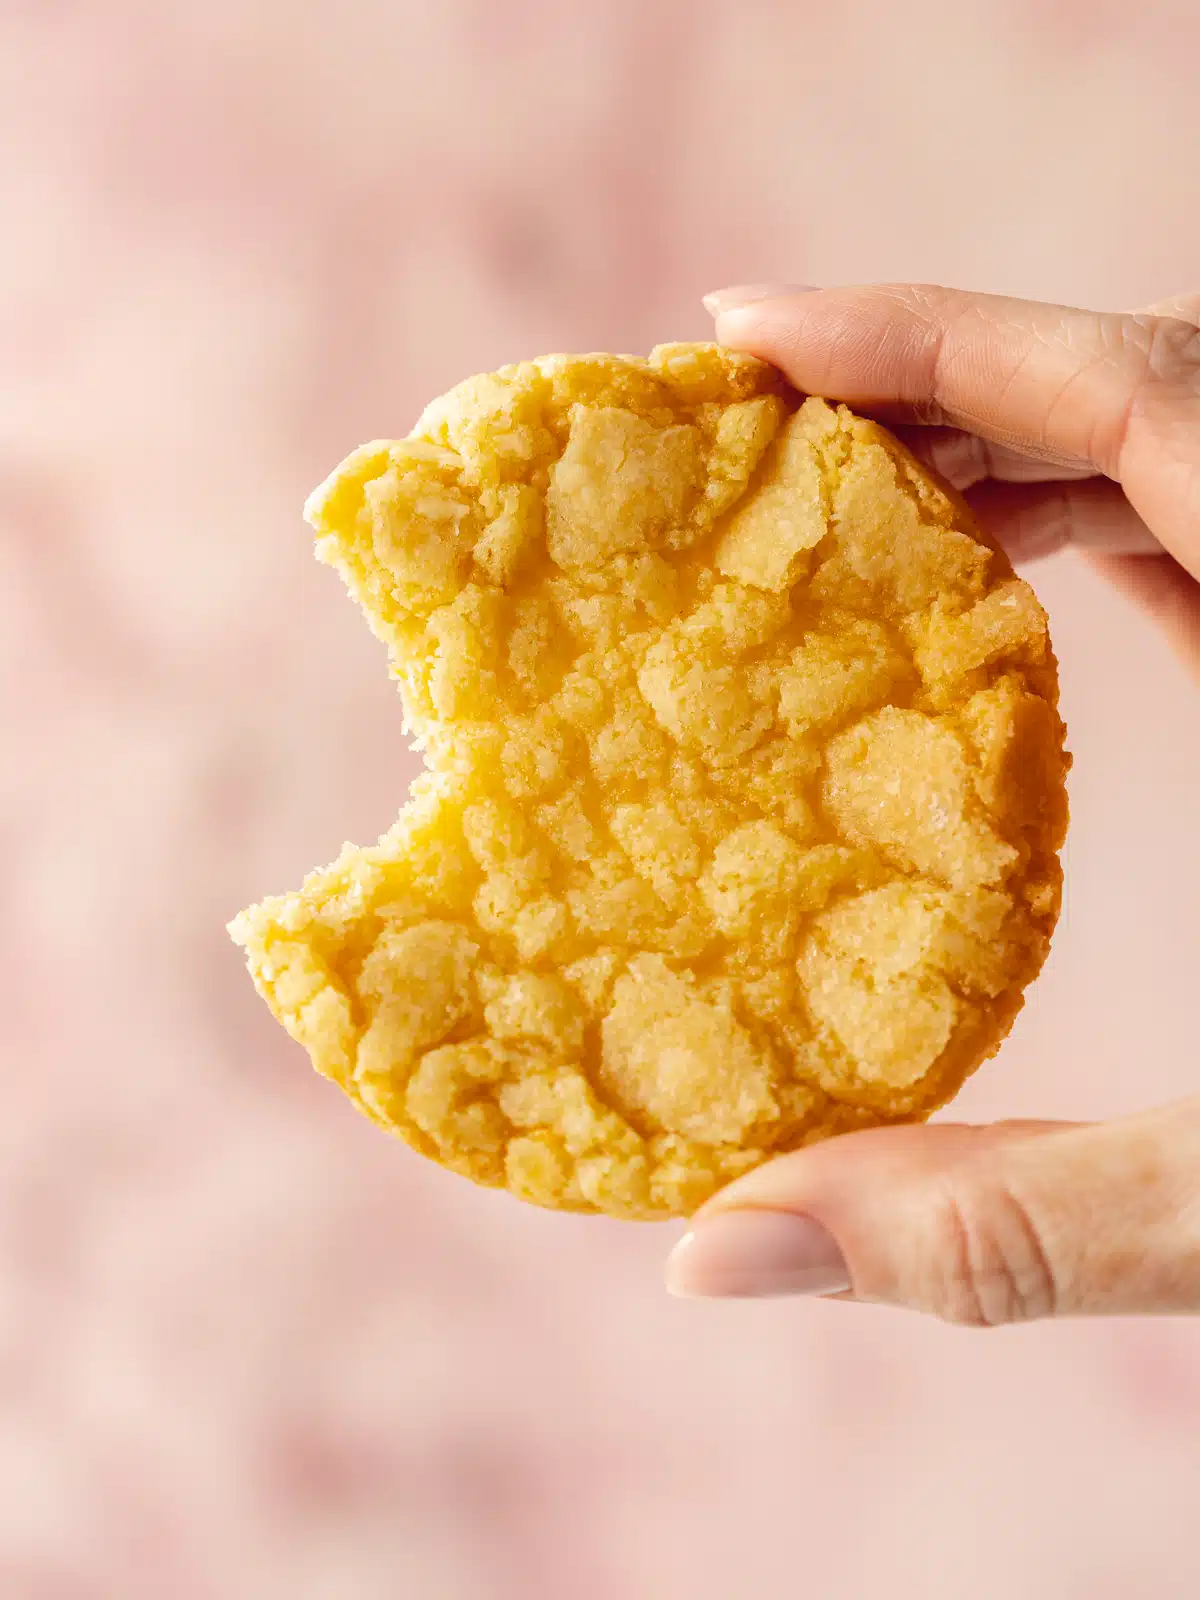 a hand holding up a vegan lemon crinkle cookie with a bite taken out of it, against a pink background.